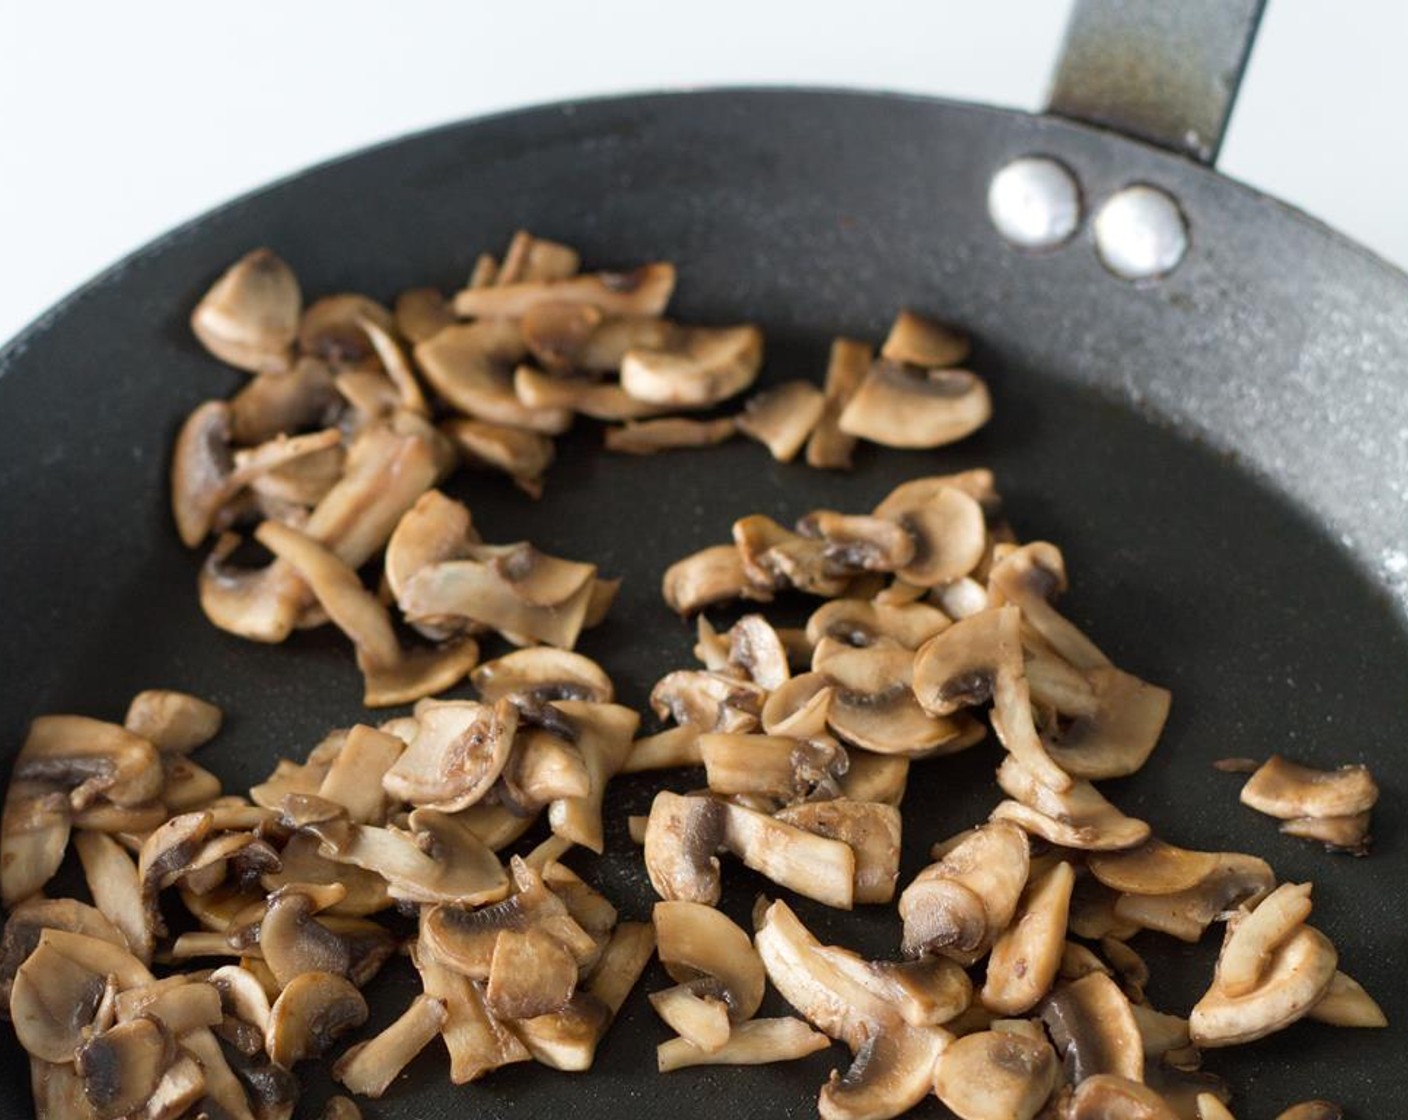 step 2 Heat a small skillet to medium heat high and add Olive Oil (1 Tbsp). Add Mushroom (1 cup) and season with Salt (to taste) and Ground Black Pepper (to taste). Move the mushrooms with a spatula frequently until they have reduced, then lower heat to medium-low.